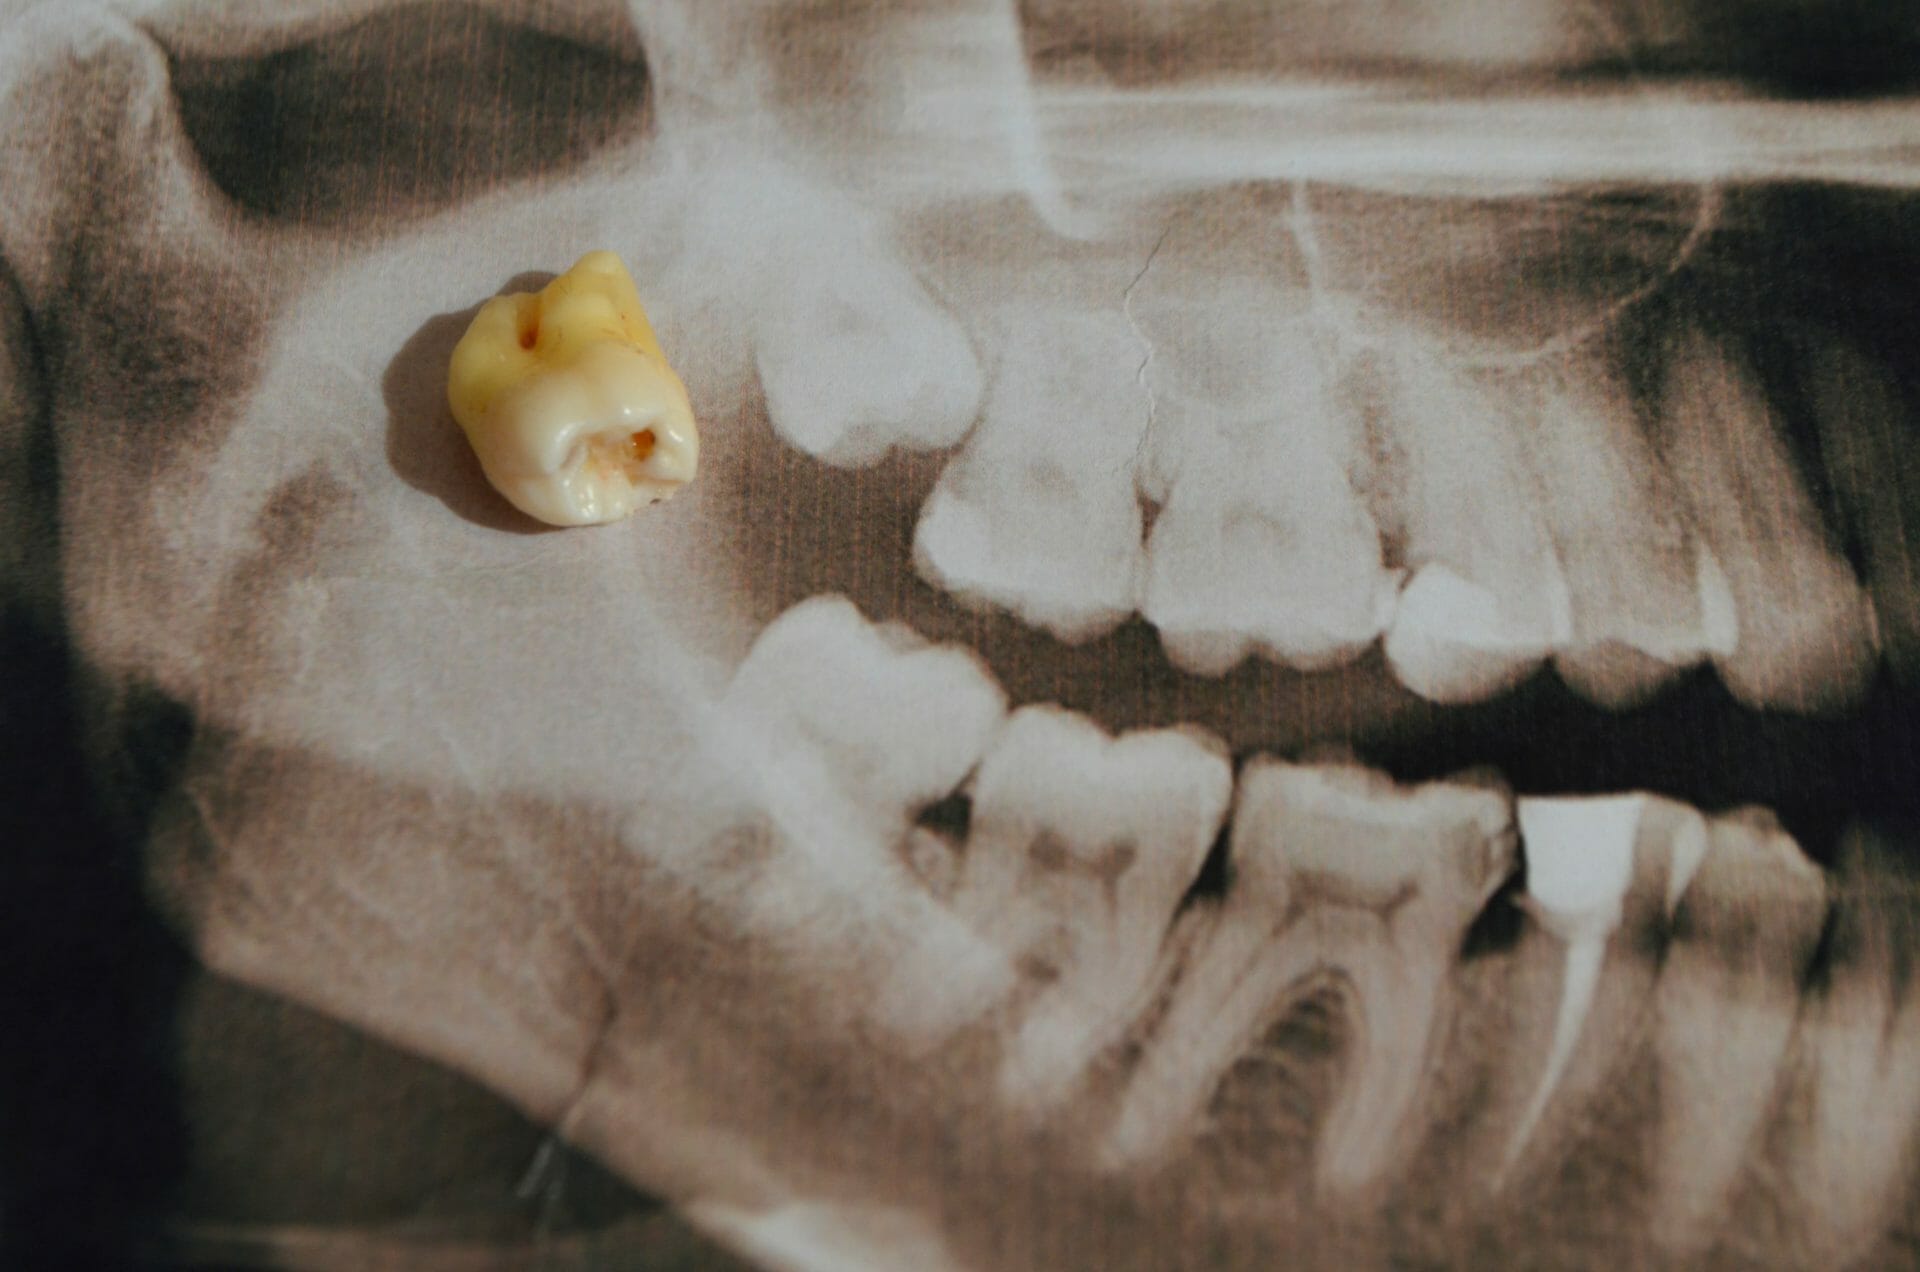 Best wisdom tooth removal in South Perth WA